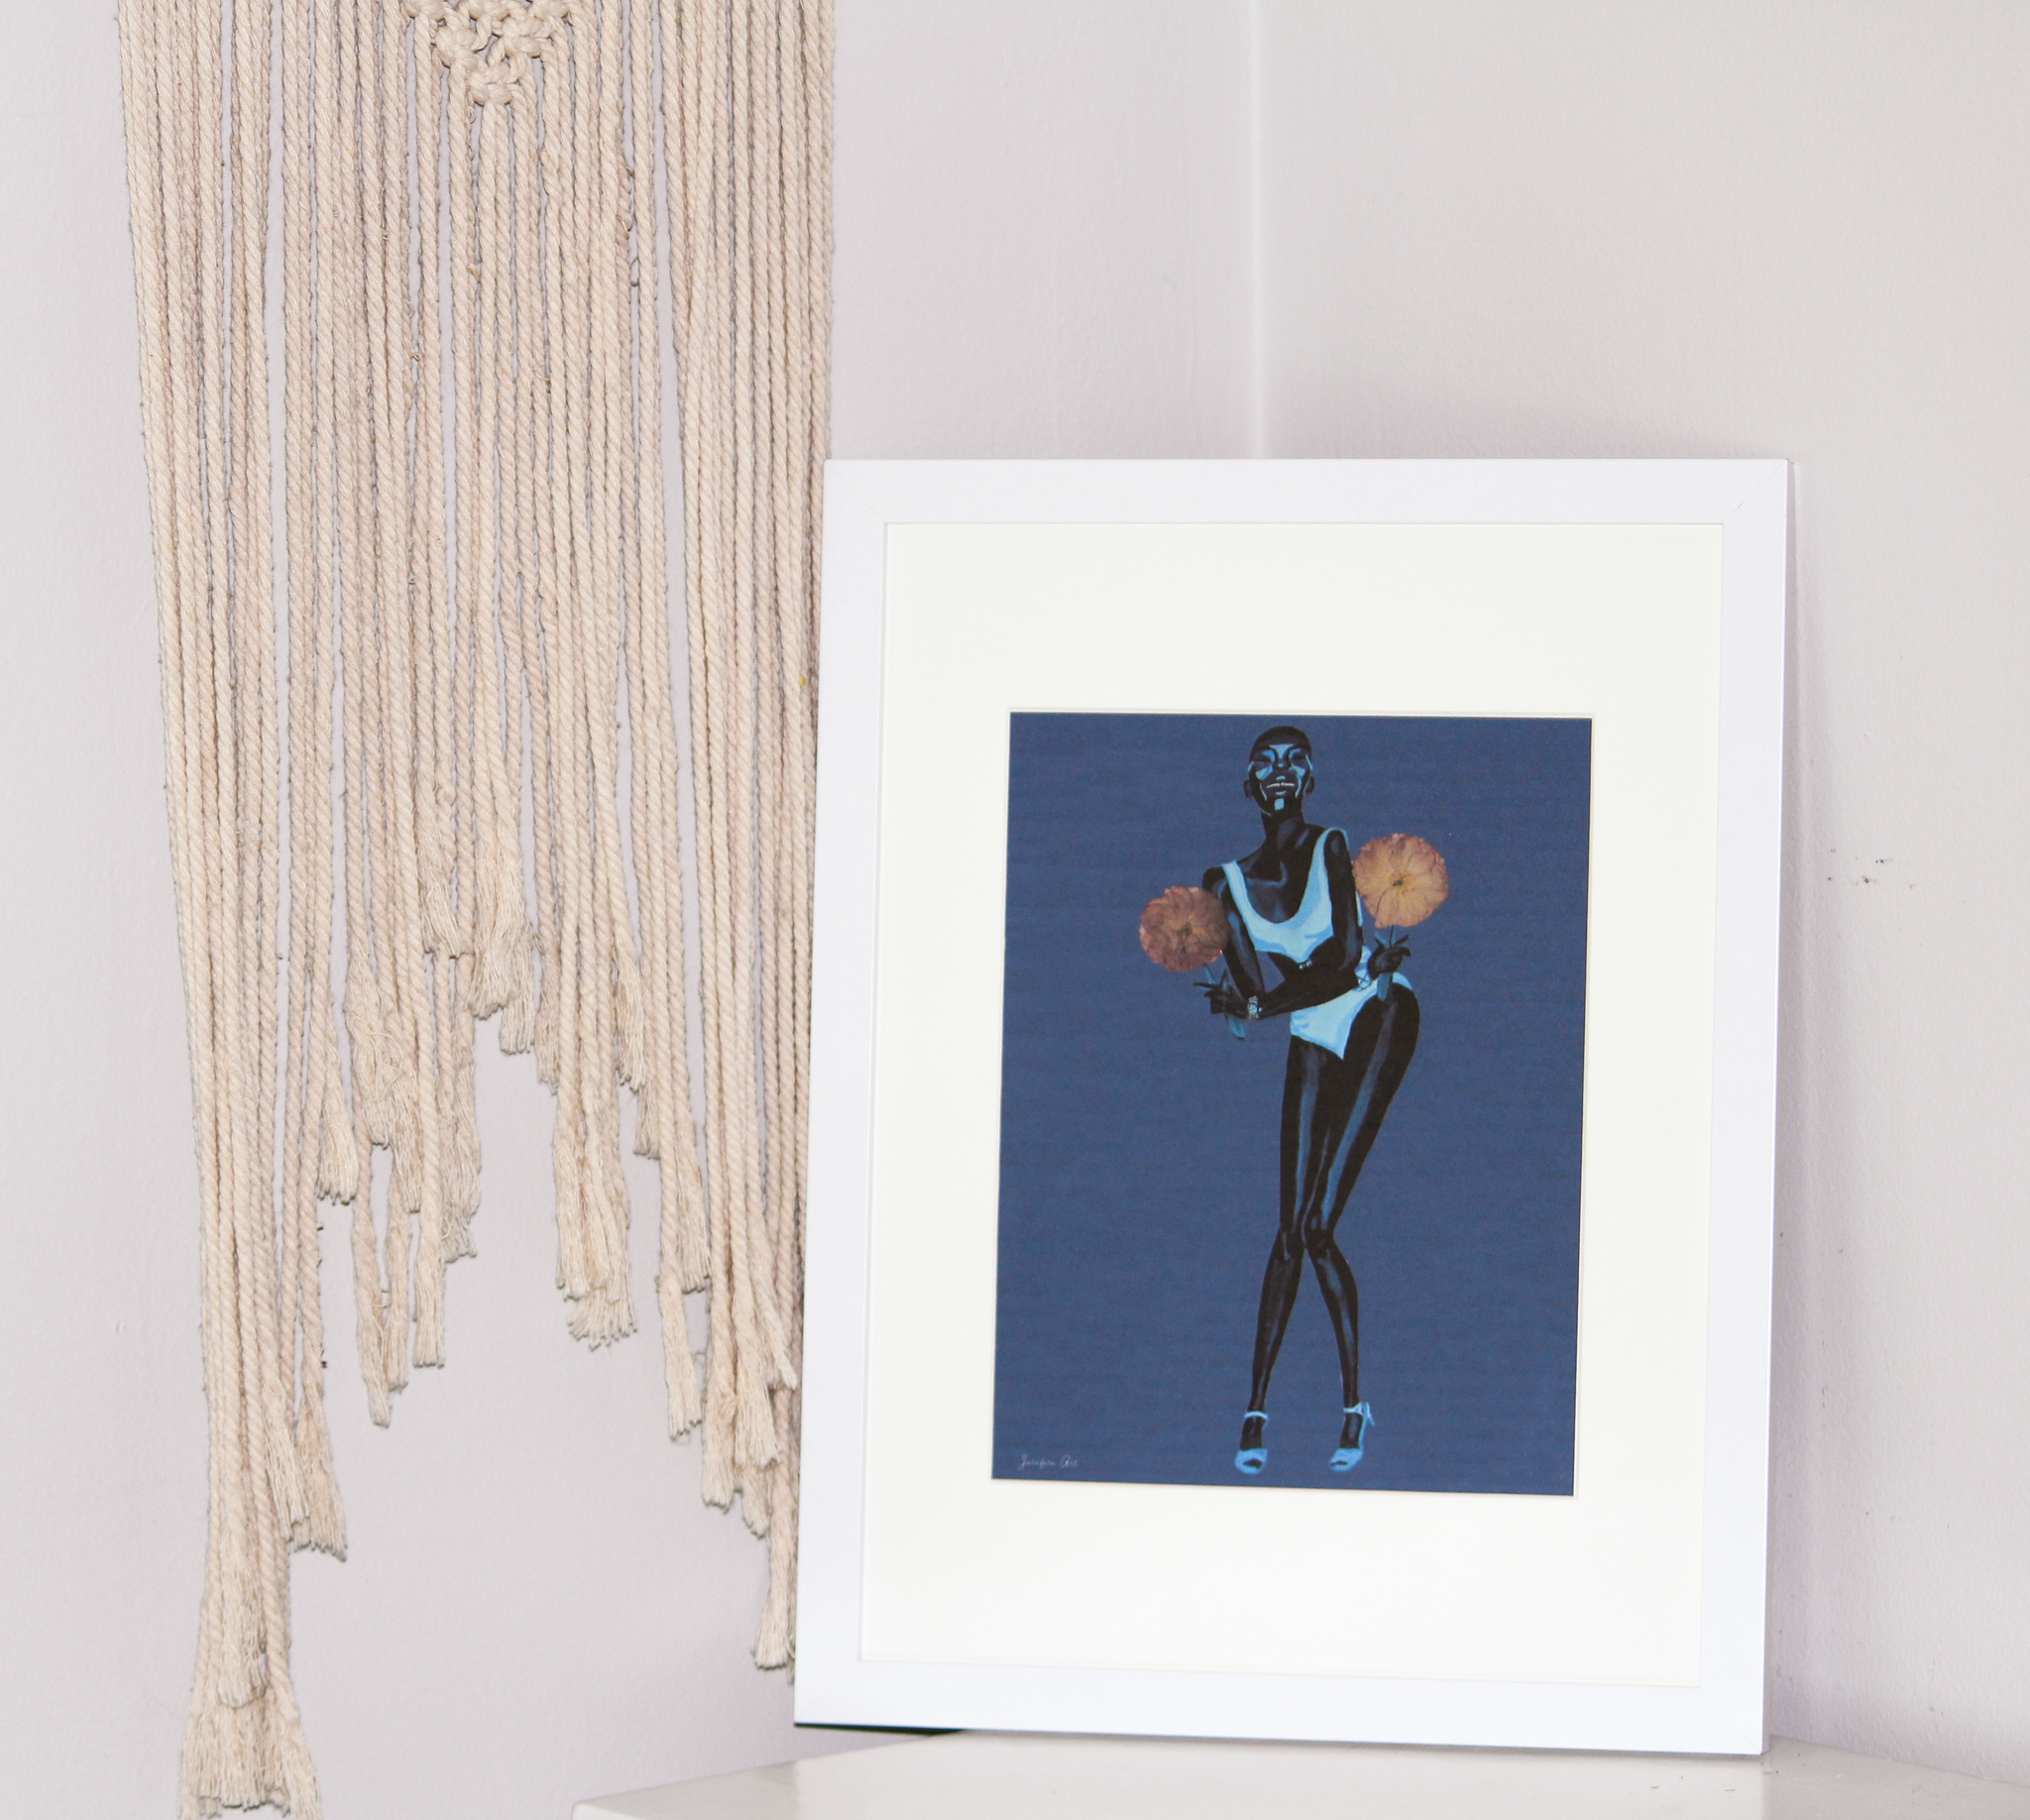 8.5 by 11 inch Black fashion art print of a painting of Black model Adut Akech wearing a Chanel one-piece swimsuit and holding pink pressed flowers with a dark blue background in a white frame with matting, standing up on a white table with tassel wall decor behind it 